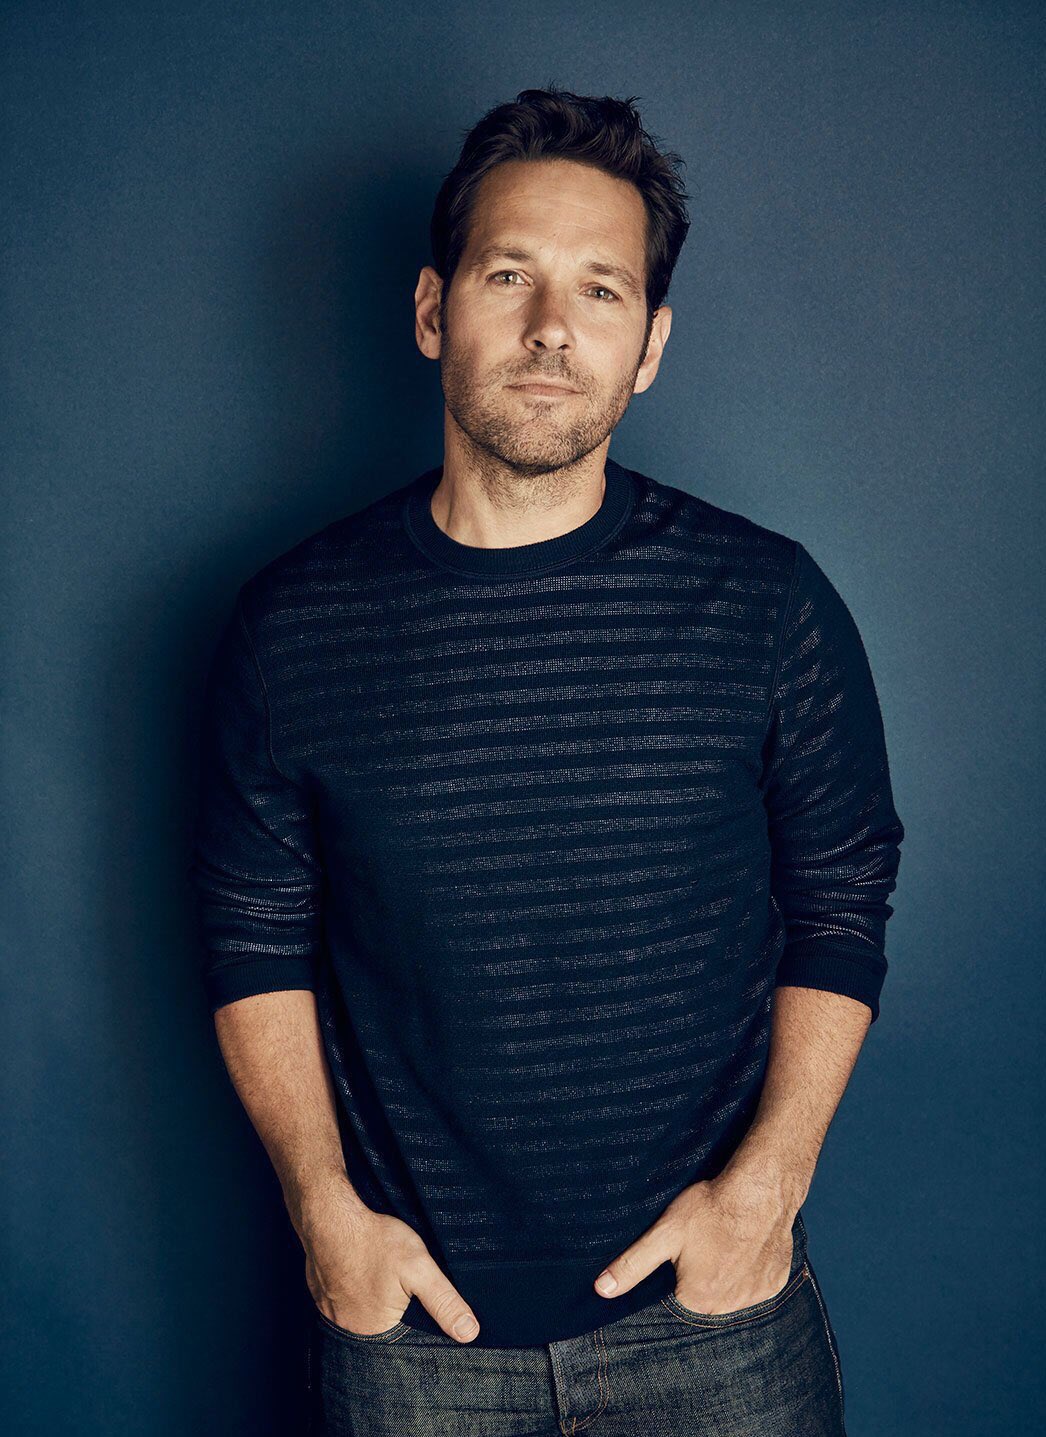 Happy 49th birthday to paul rudd!!
this guy is just refusing to age huh 